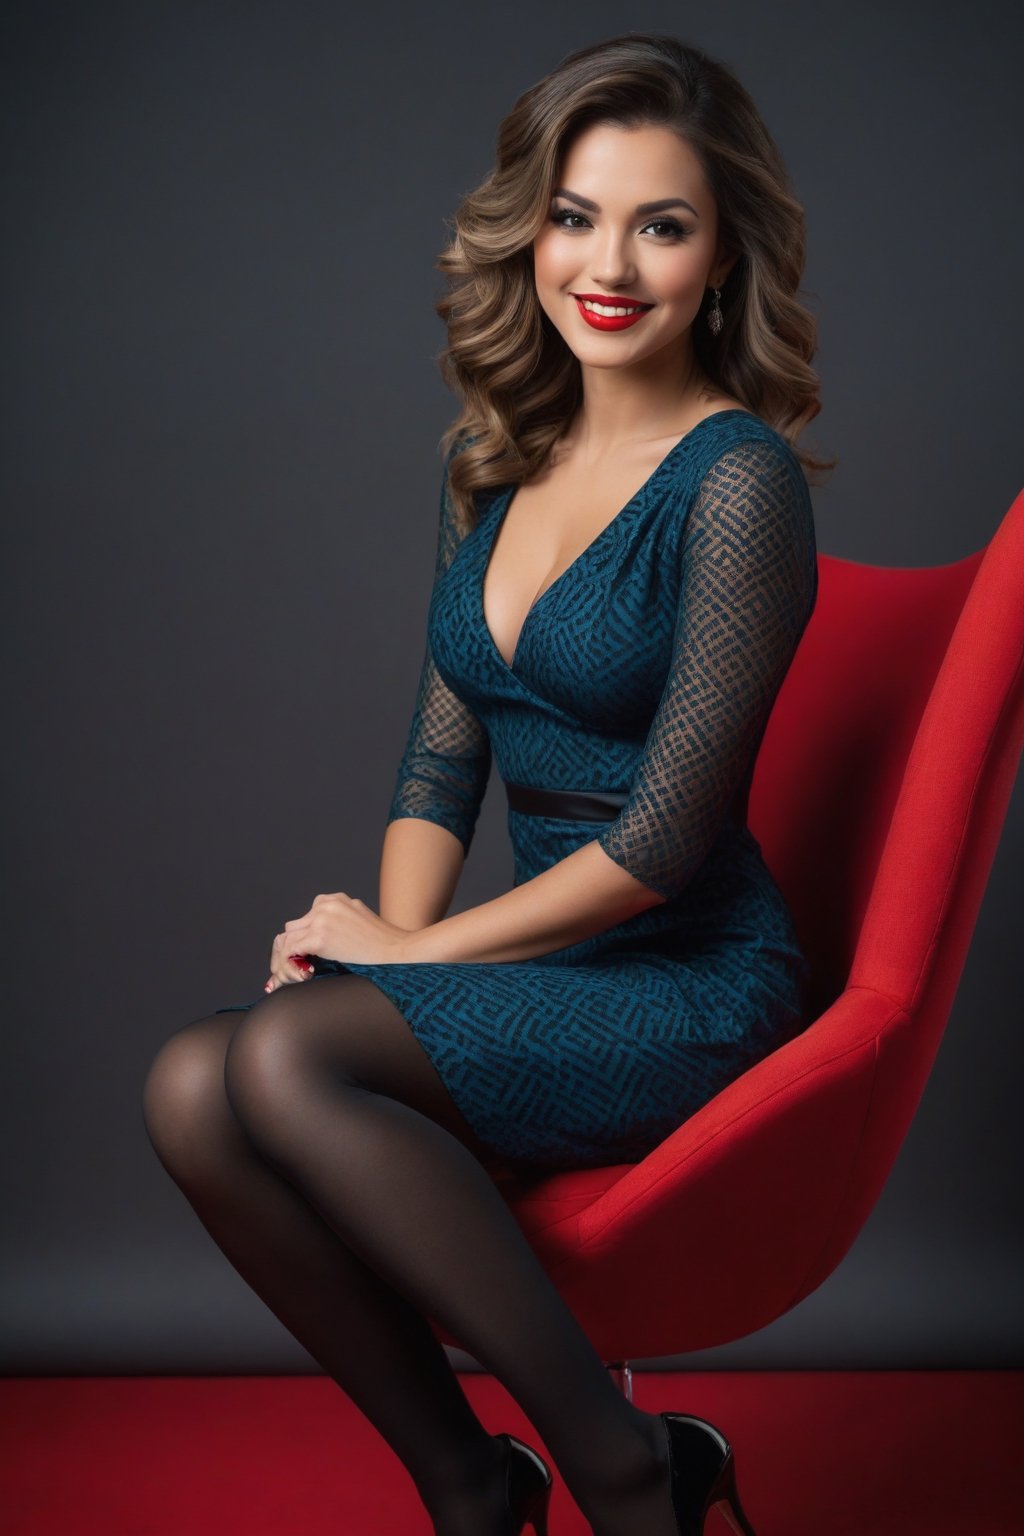 A stylish woman sitting on a modern red chair, with her legs crossed and slightly leaning forward. She is wearing a patterned tight dress, black stockings, and high heels. Her hair is long, wavy, and flowing over her shoulders. She has a confident smile and is looking forward.